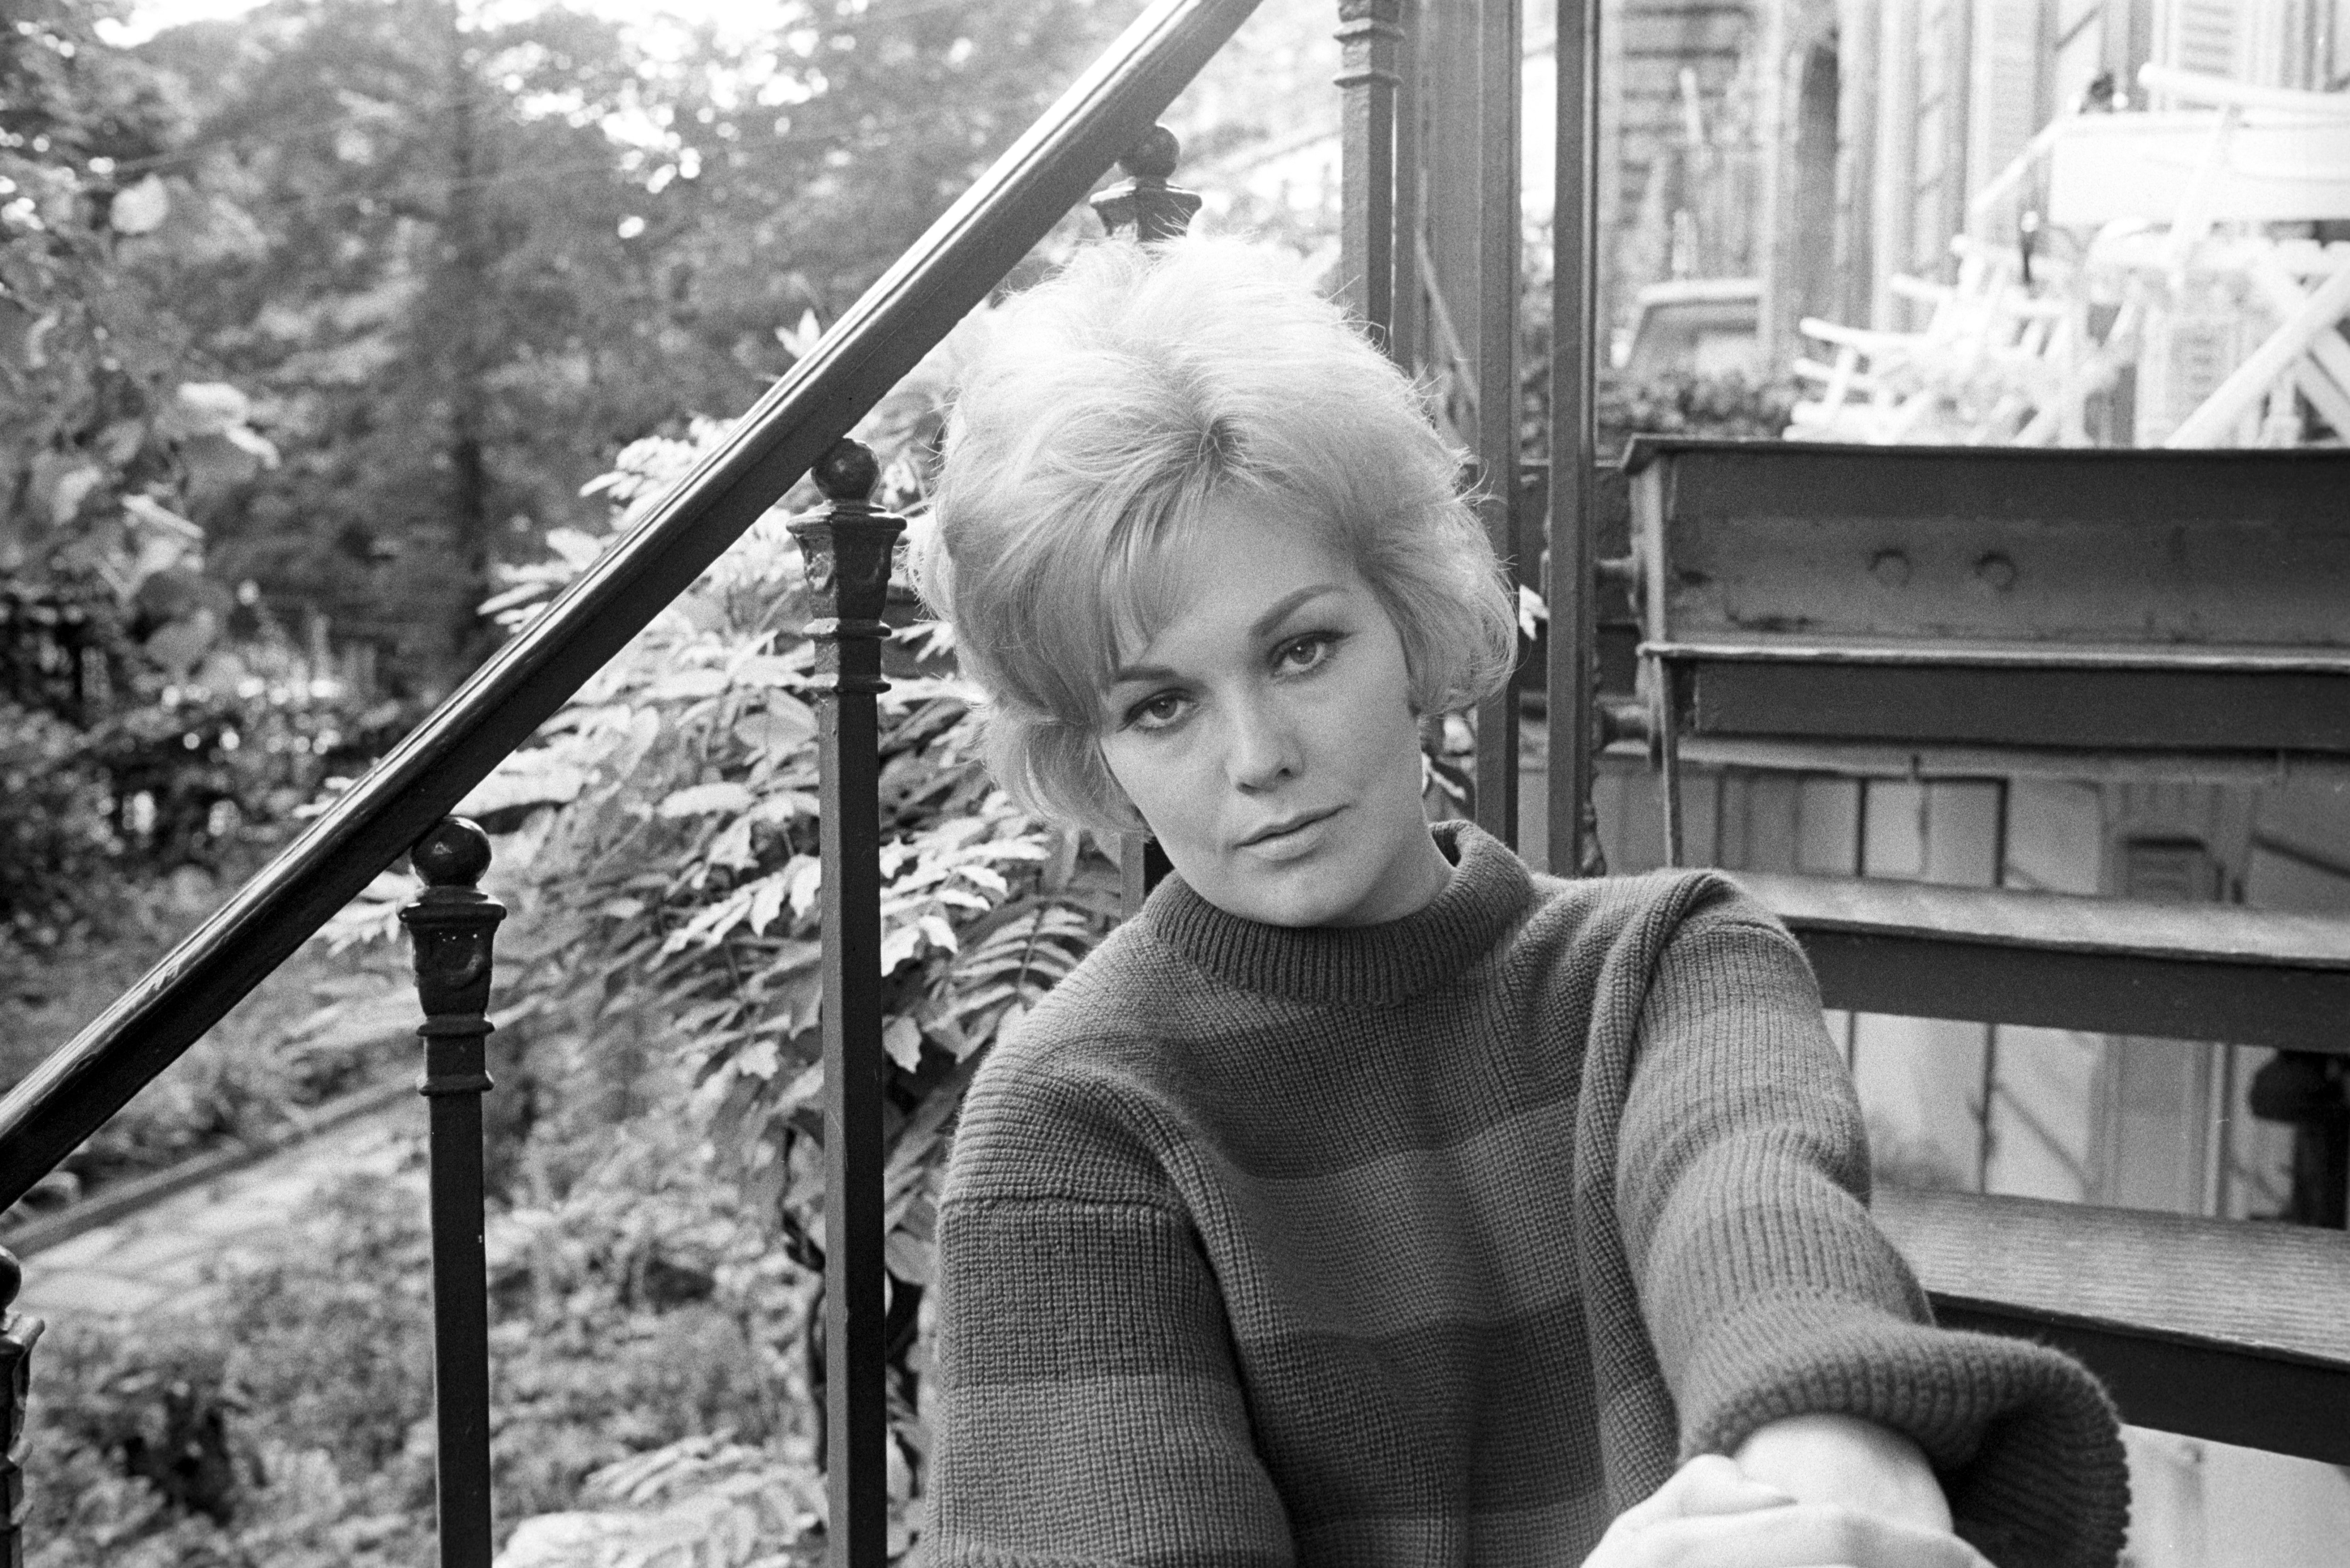 Kim Novak posing on a staircase at her house on September 28, 1965 in Paris ┃Source: Getty Images